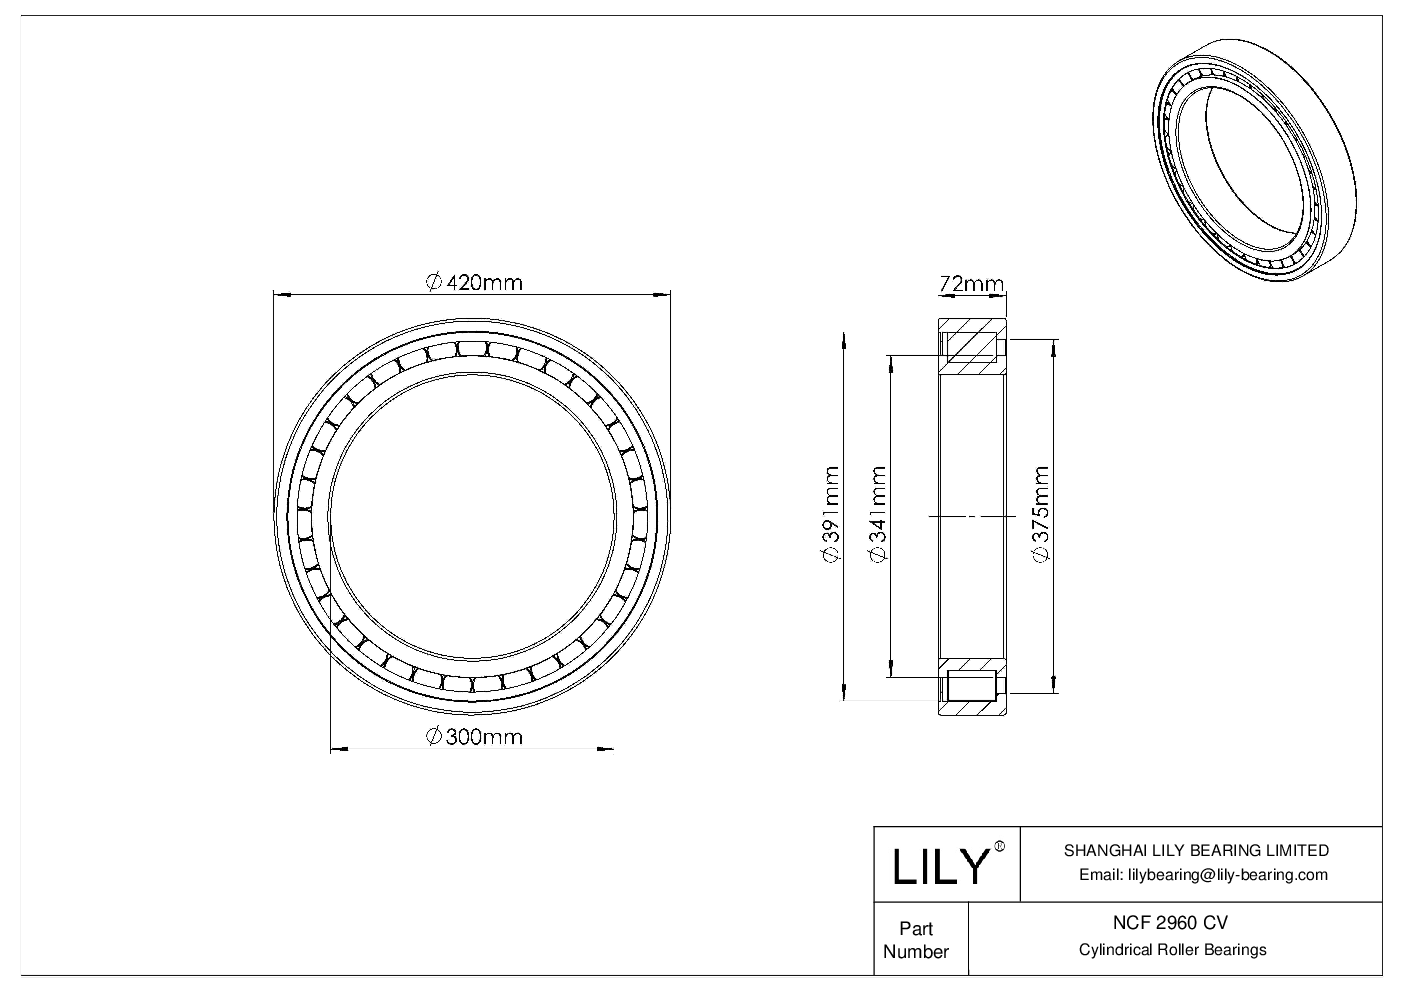 NCF 2960 CV Single Row Full Complement Cylindrical Roller Bearings cad drawing